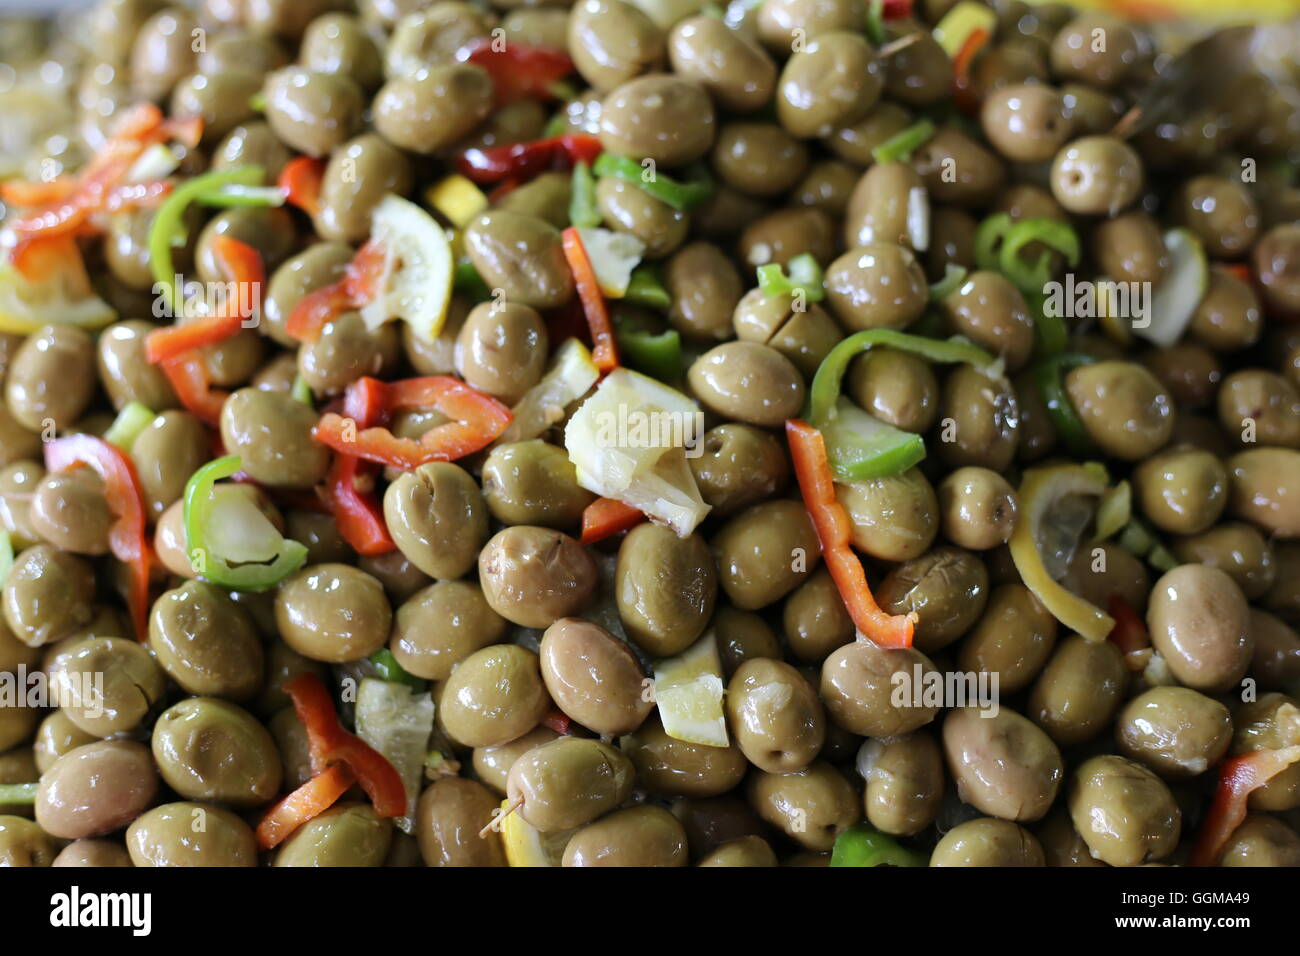 Green Olives. Green spicy olives in a market stall, close up. Stack of brown olives decorated with red and green bell pepper slices and yellow lemon p Stock Photo